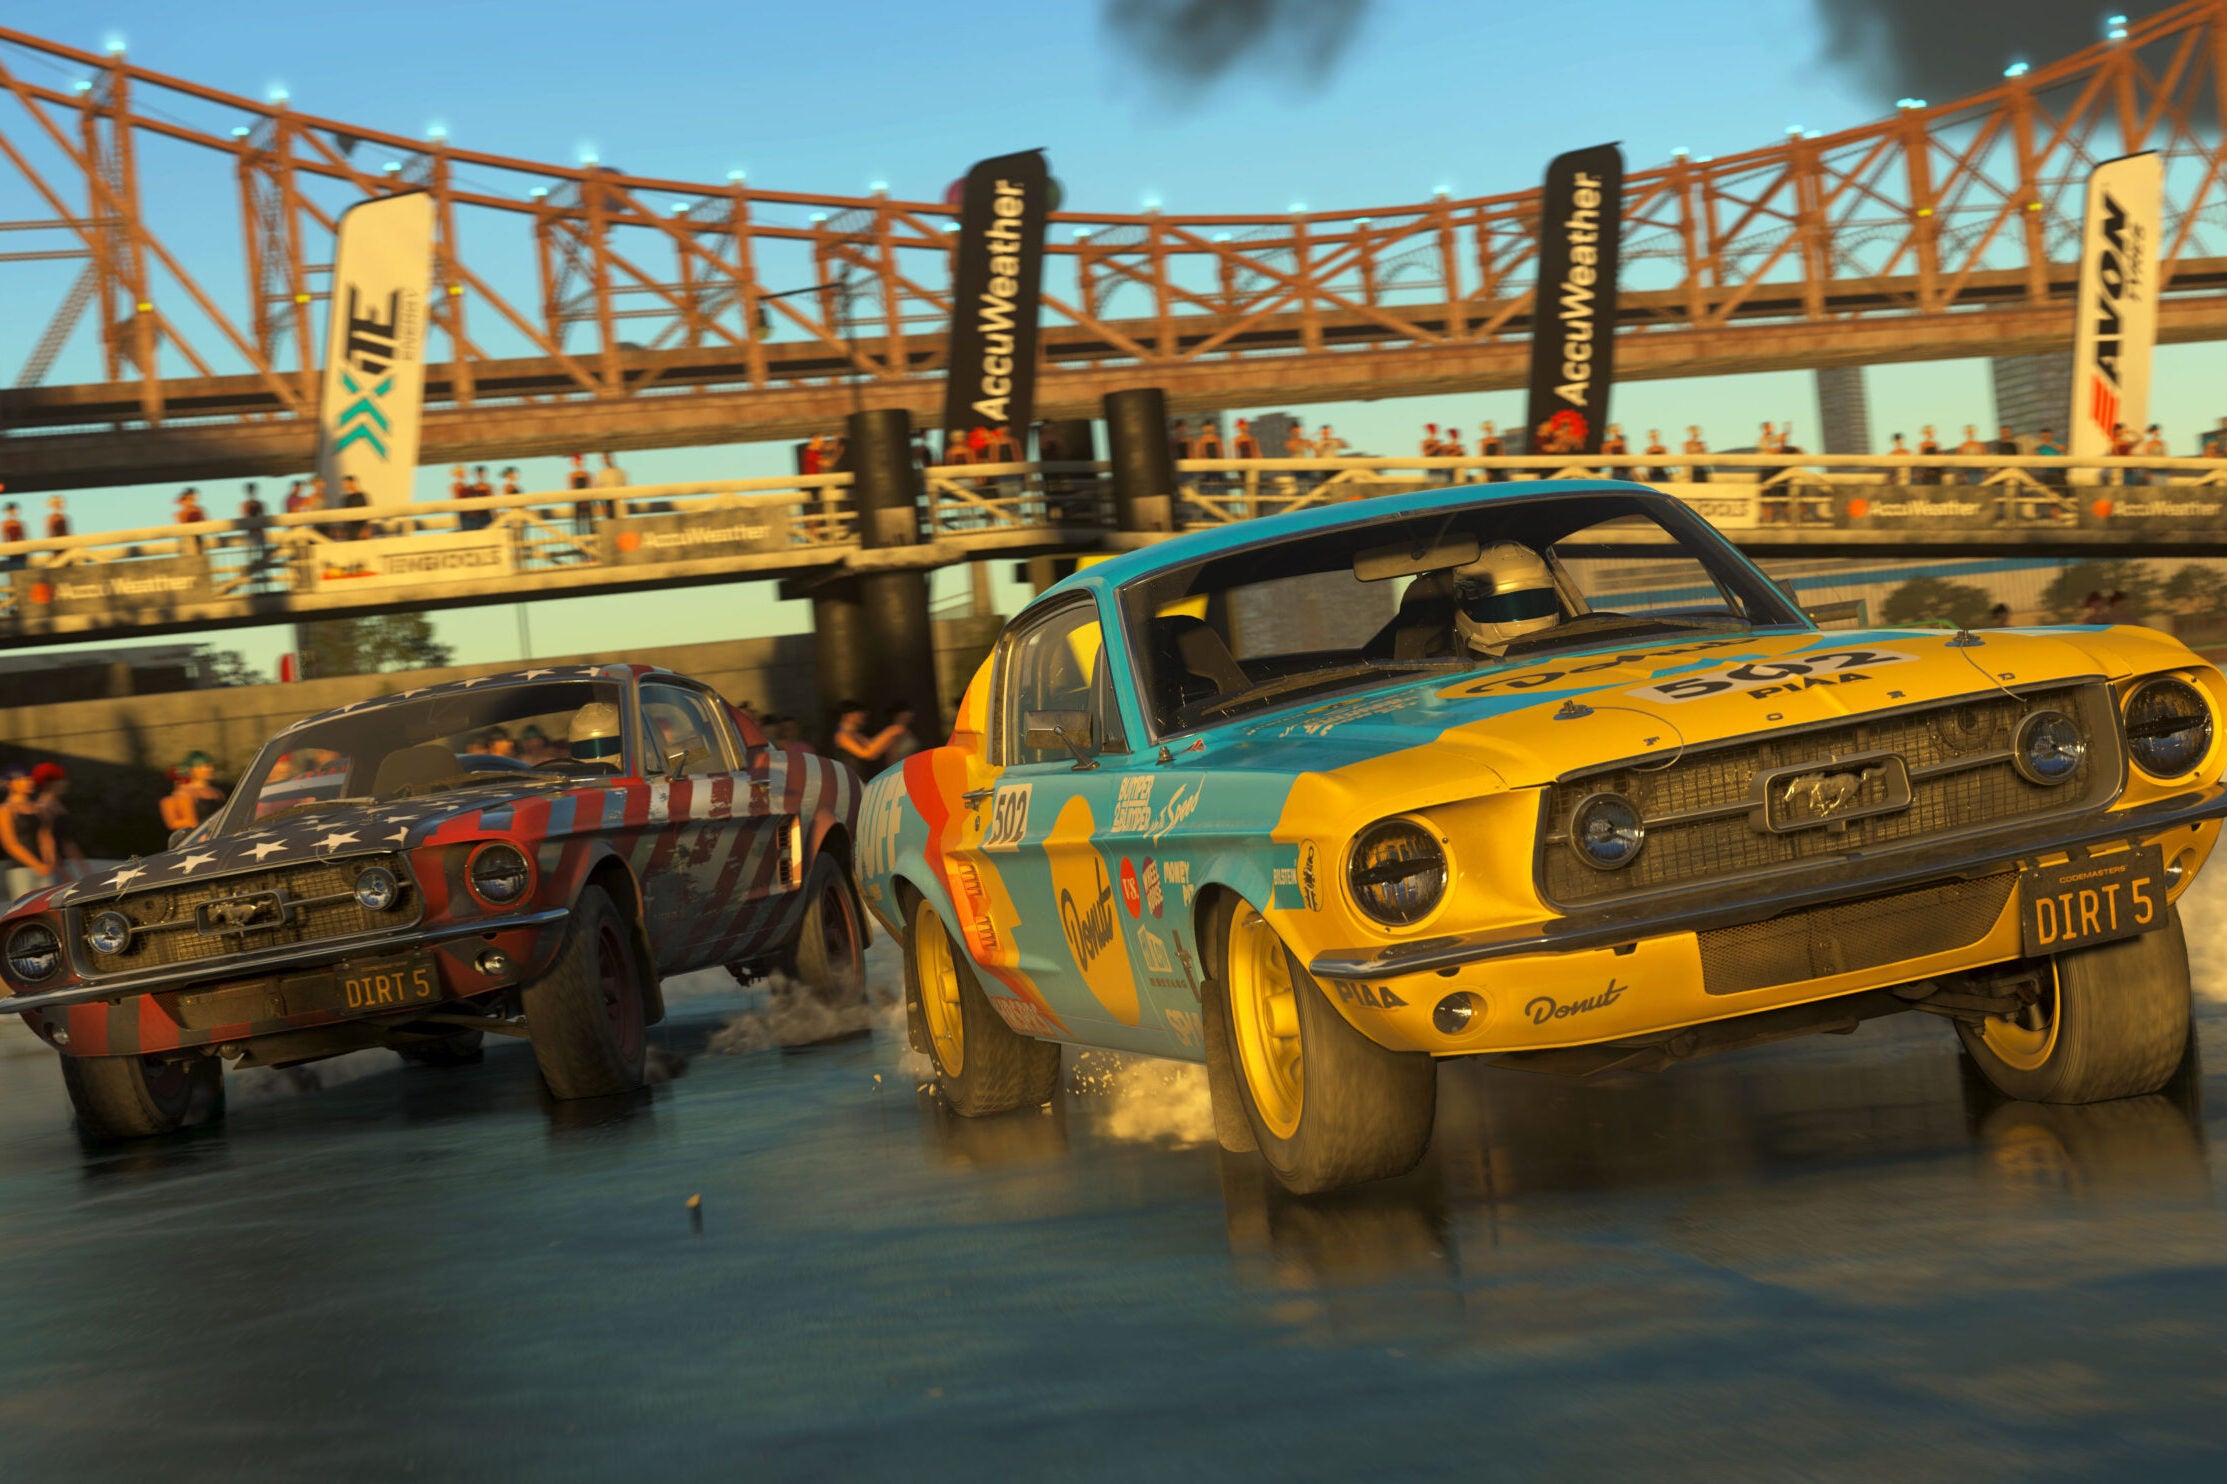 Girlfriend burnt Ally Dirt 5 Review | Trusted Reviews